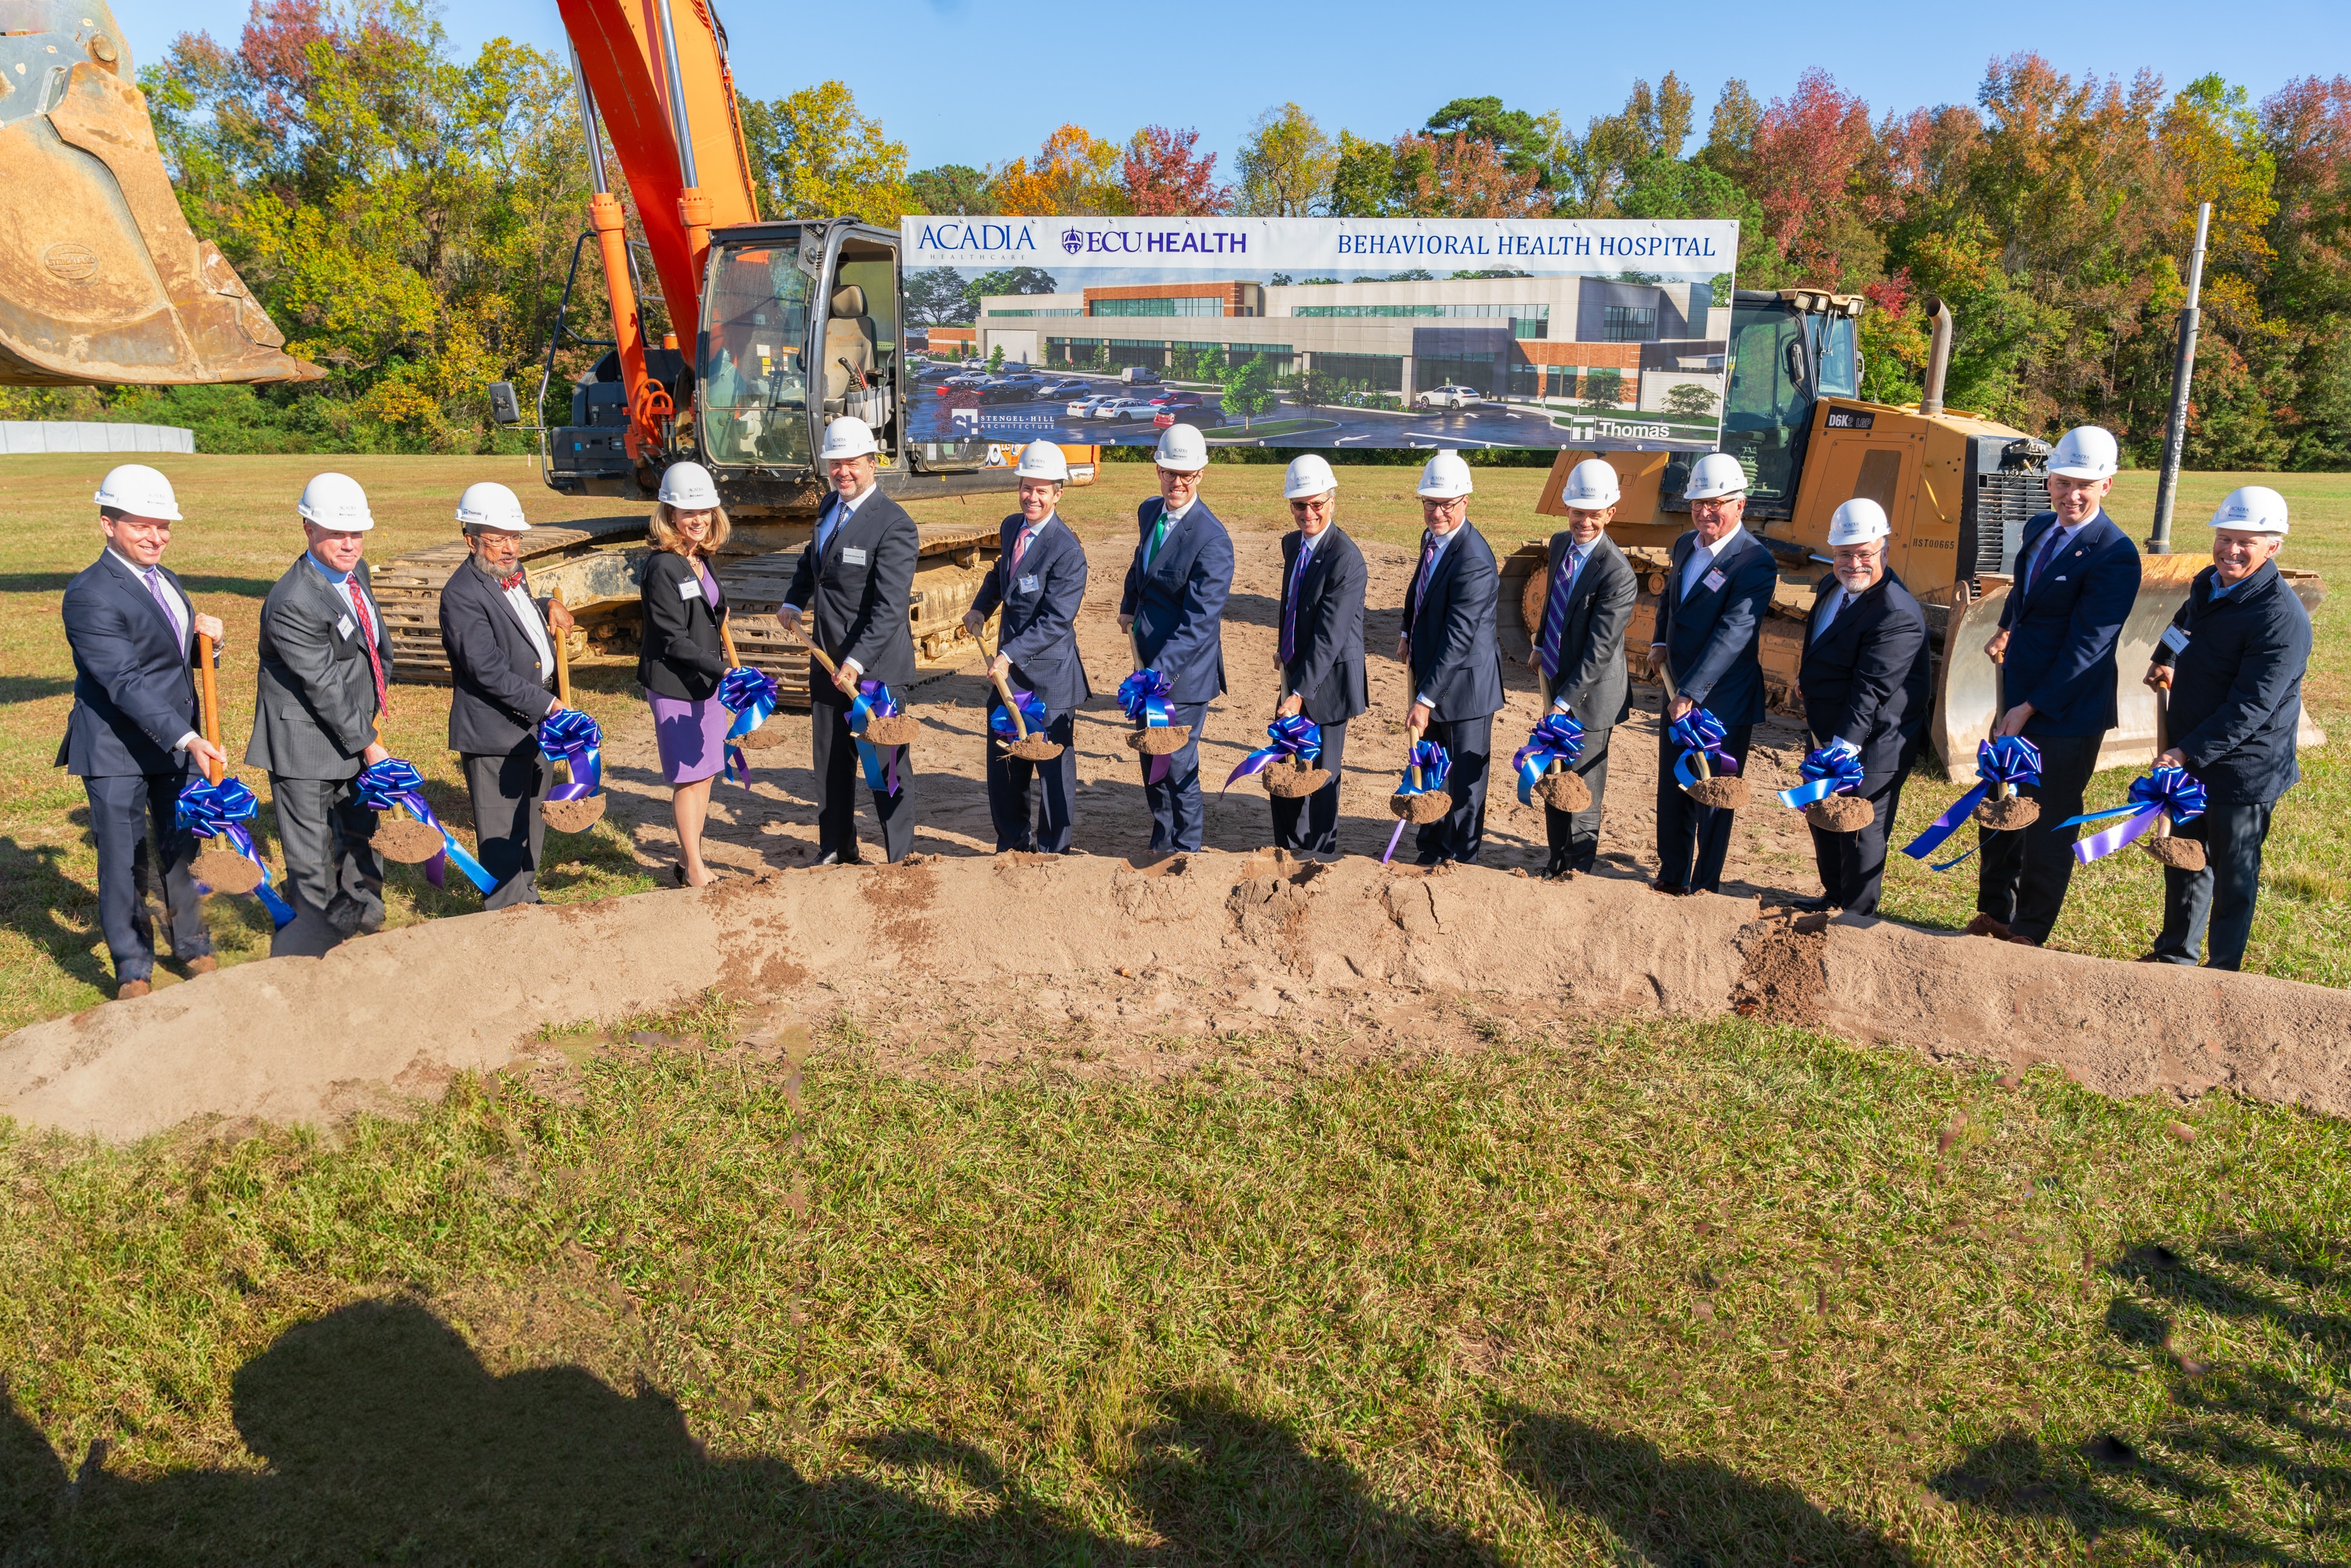 From left: Brennen Reynolds, Jeffrey Woods, Dr. Sy Saeed, Isa Diaz, Dr. Michael Genovese, Chris Hunter, Sec. Kody H. Kinsley, Dr. Michael Waldrum, Brian Floyd, Todd Hickey, Bob Greczyn, Dr. Michael Lang, Chancellor Philip Rogers, William Monk hold shovels during the groundbreaking for the upcoming behavioral health hospital in Greenville.